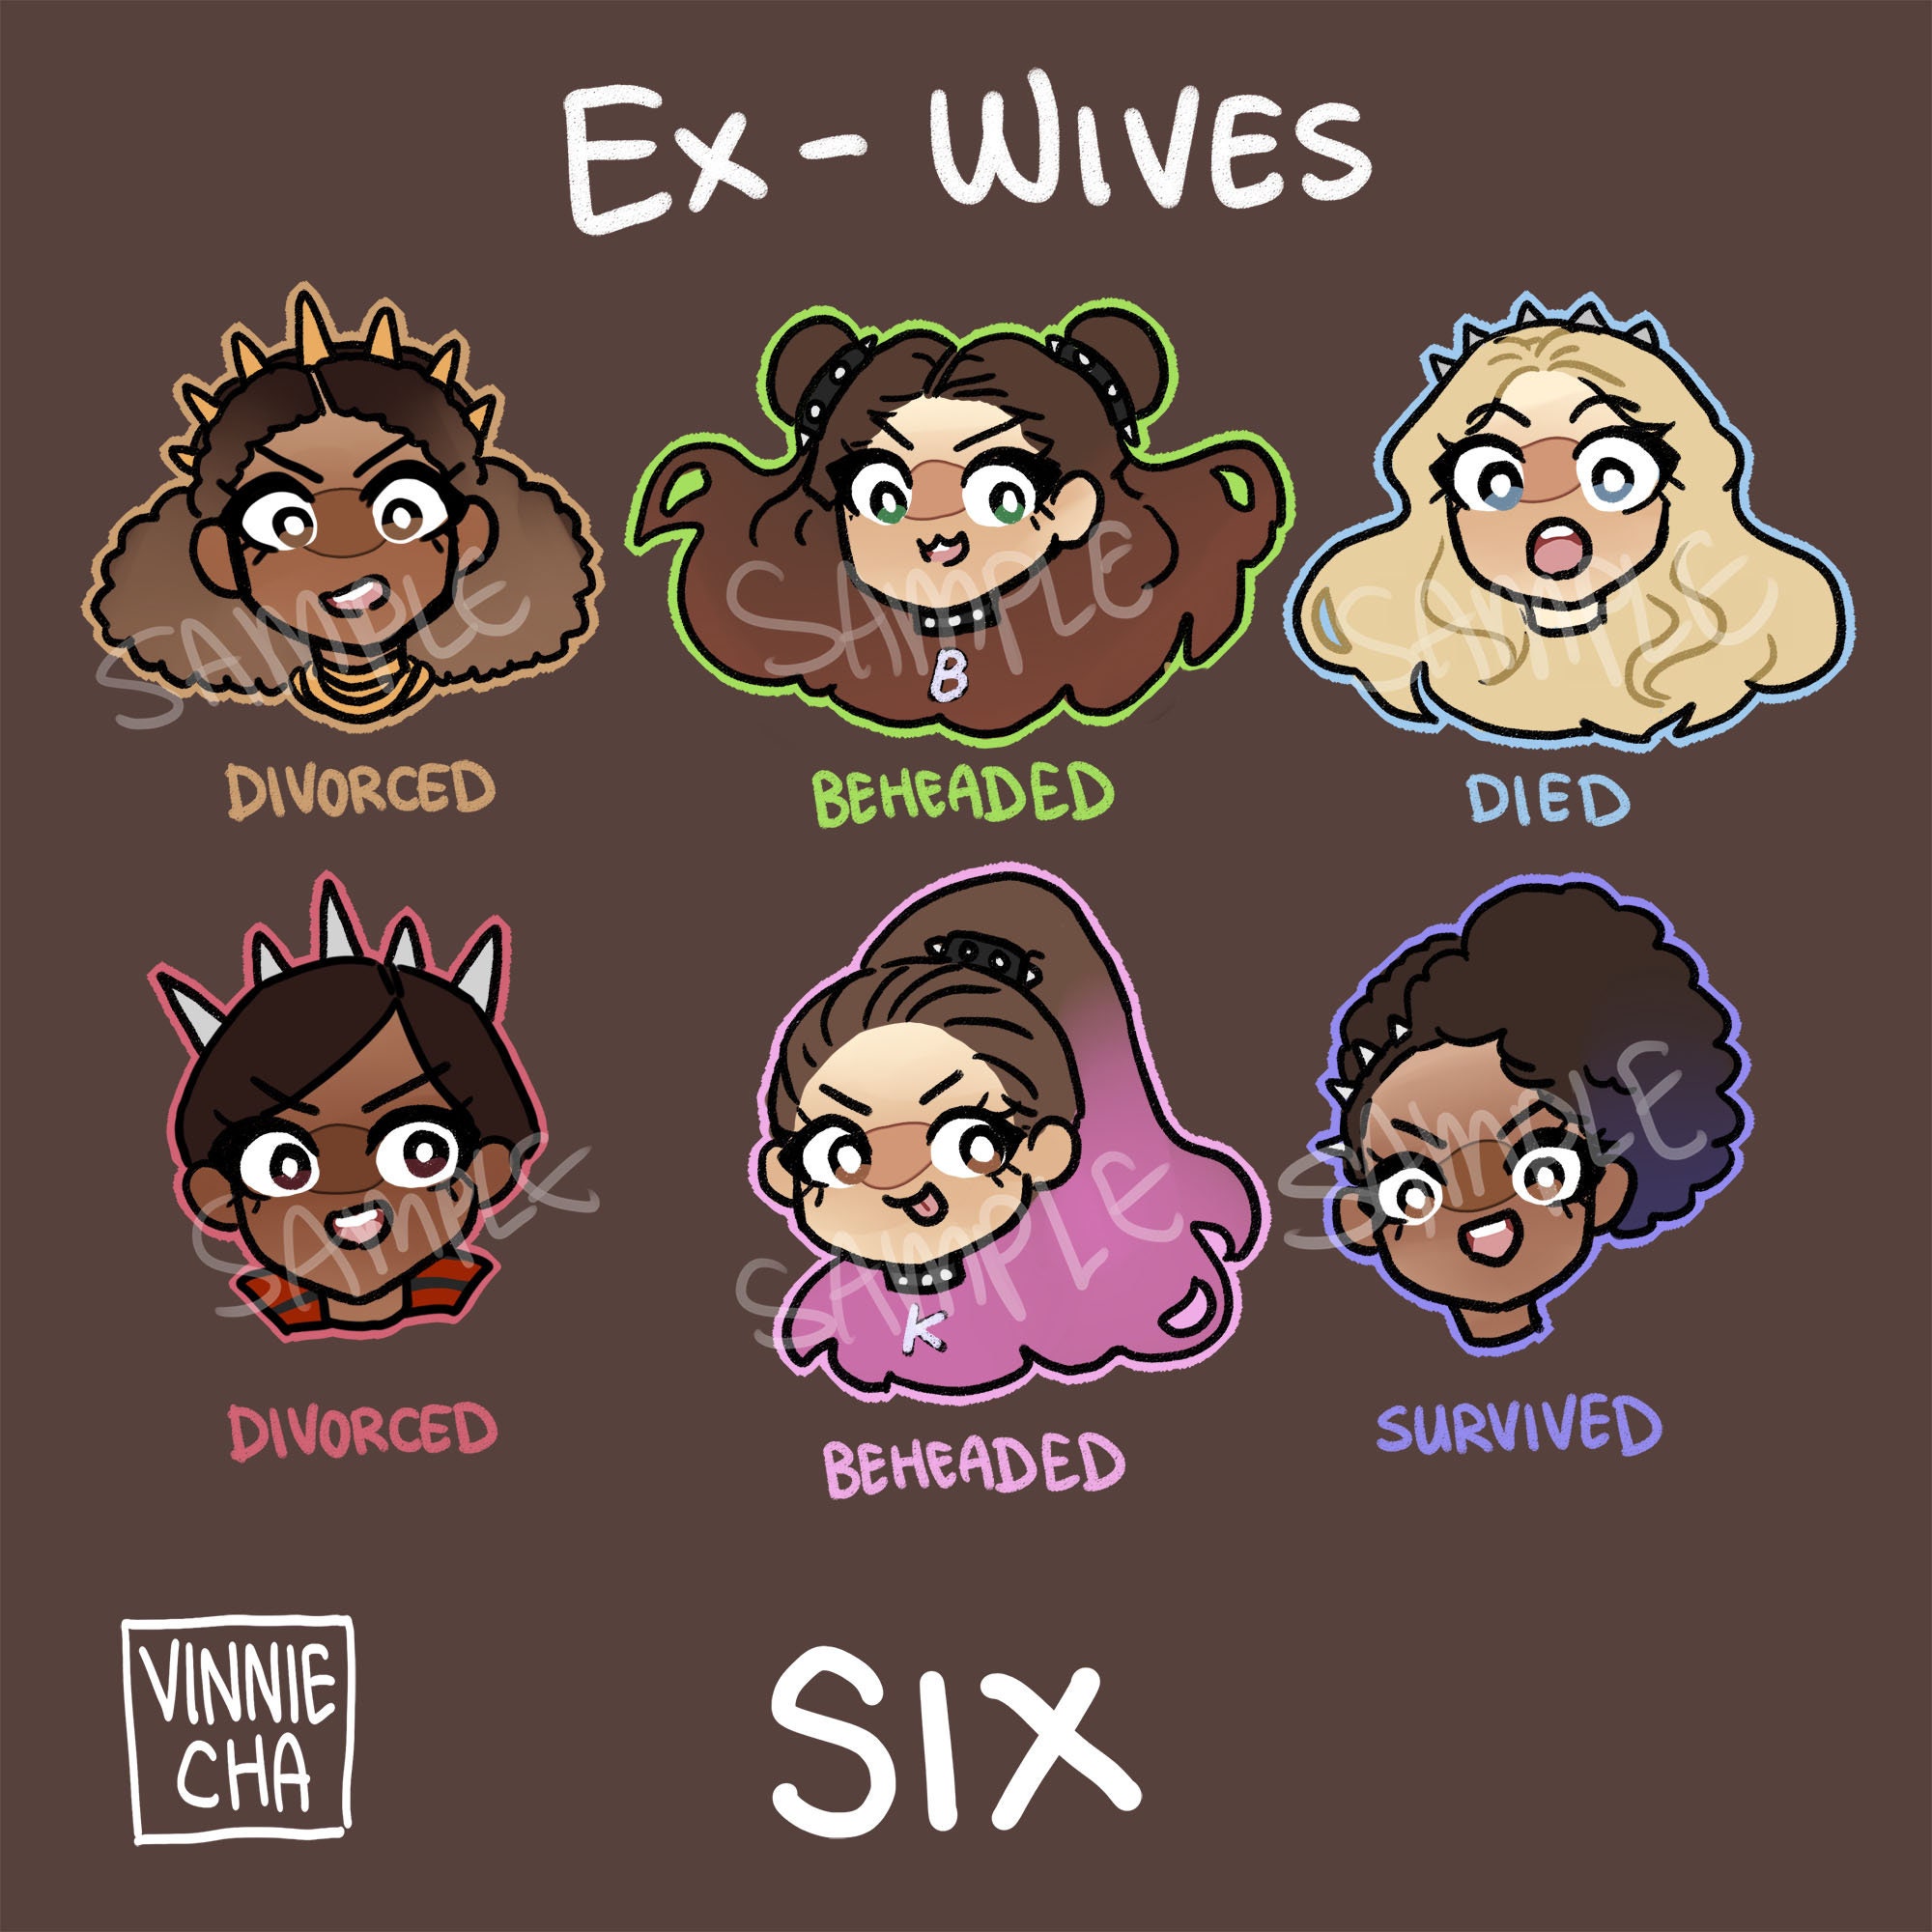 SIX the Musical Ex-wives Sticker Sheet pic